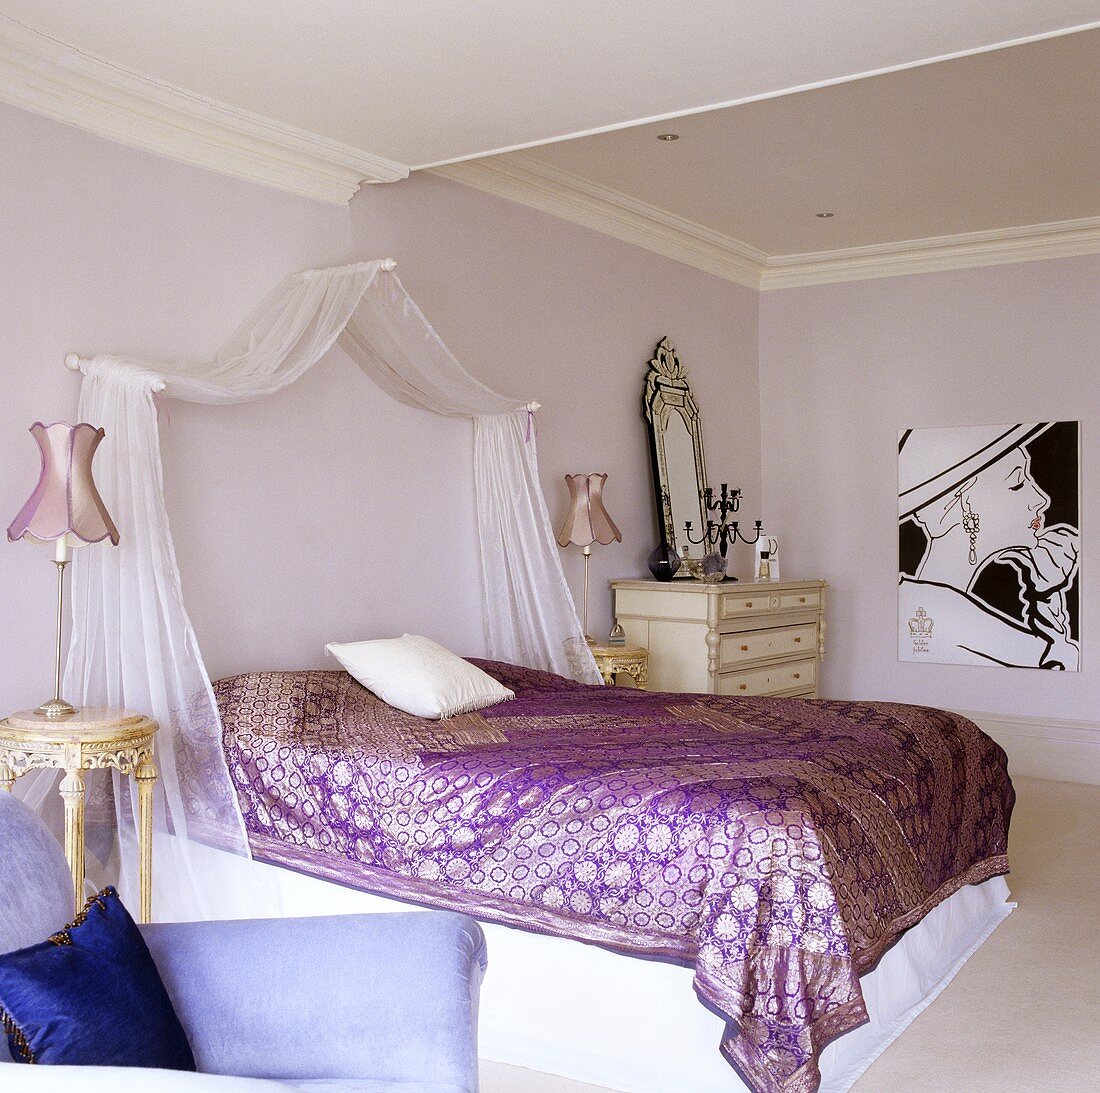 An Oriental bedroom - a light canopy above a shimmering metallic throw